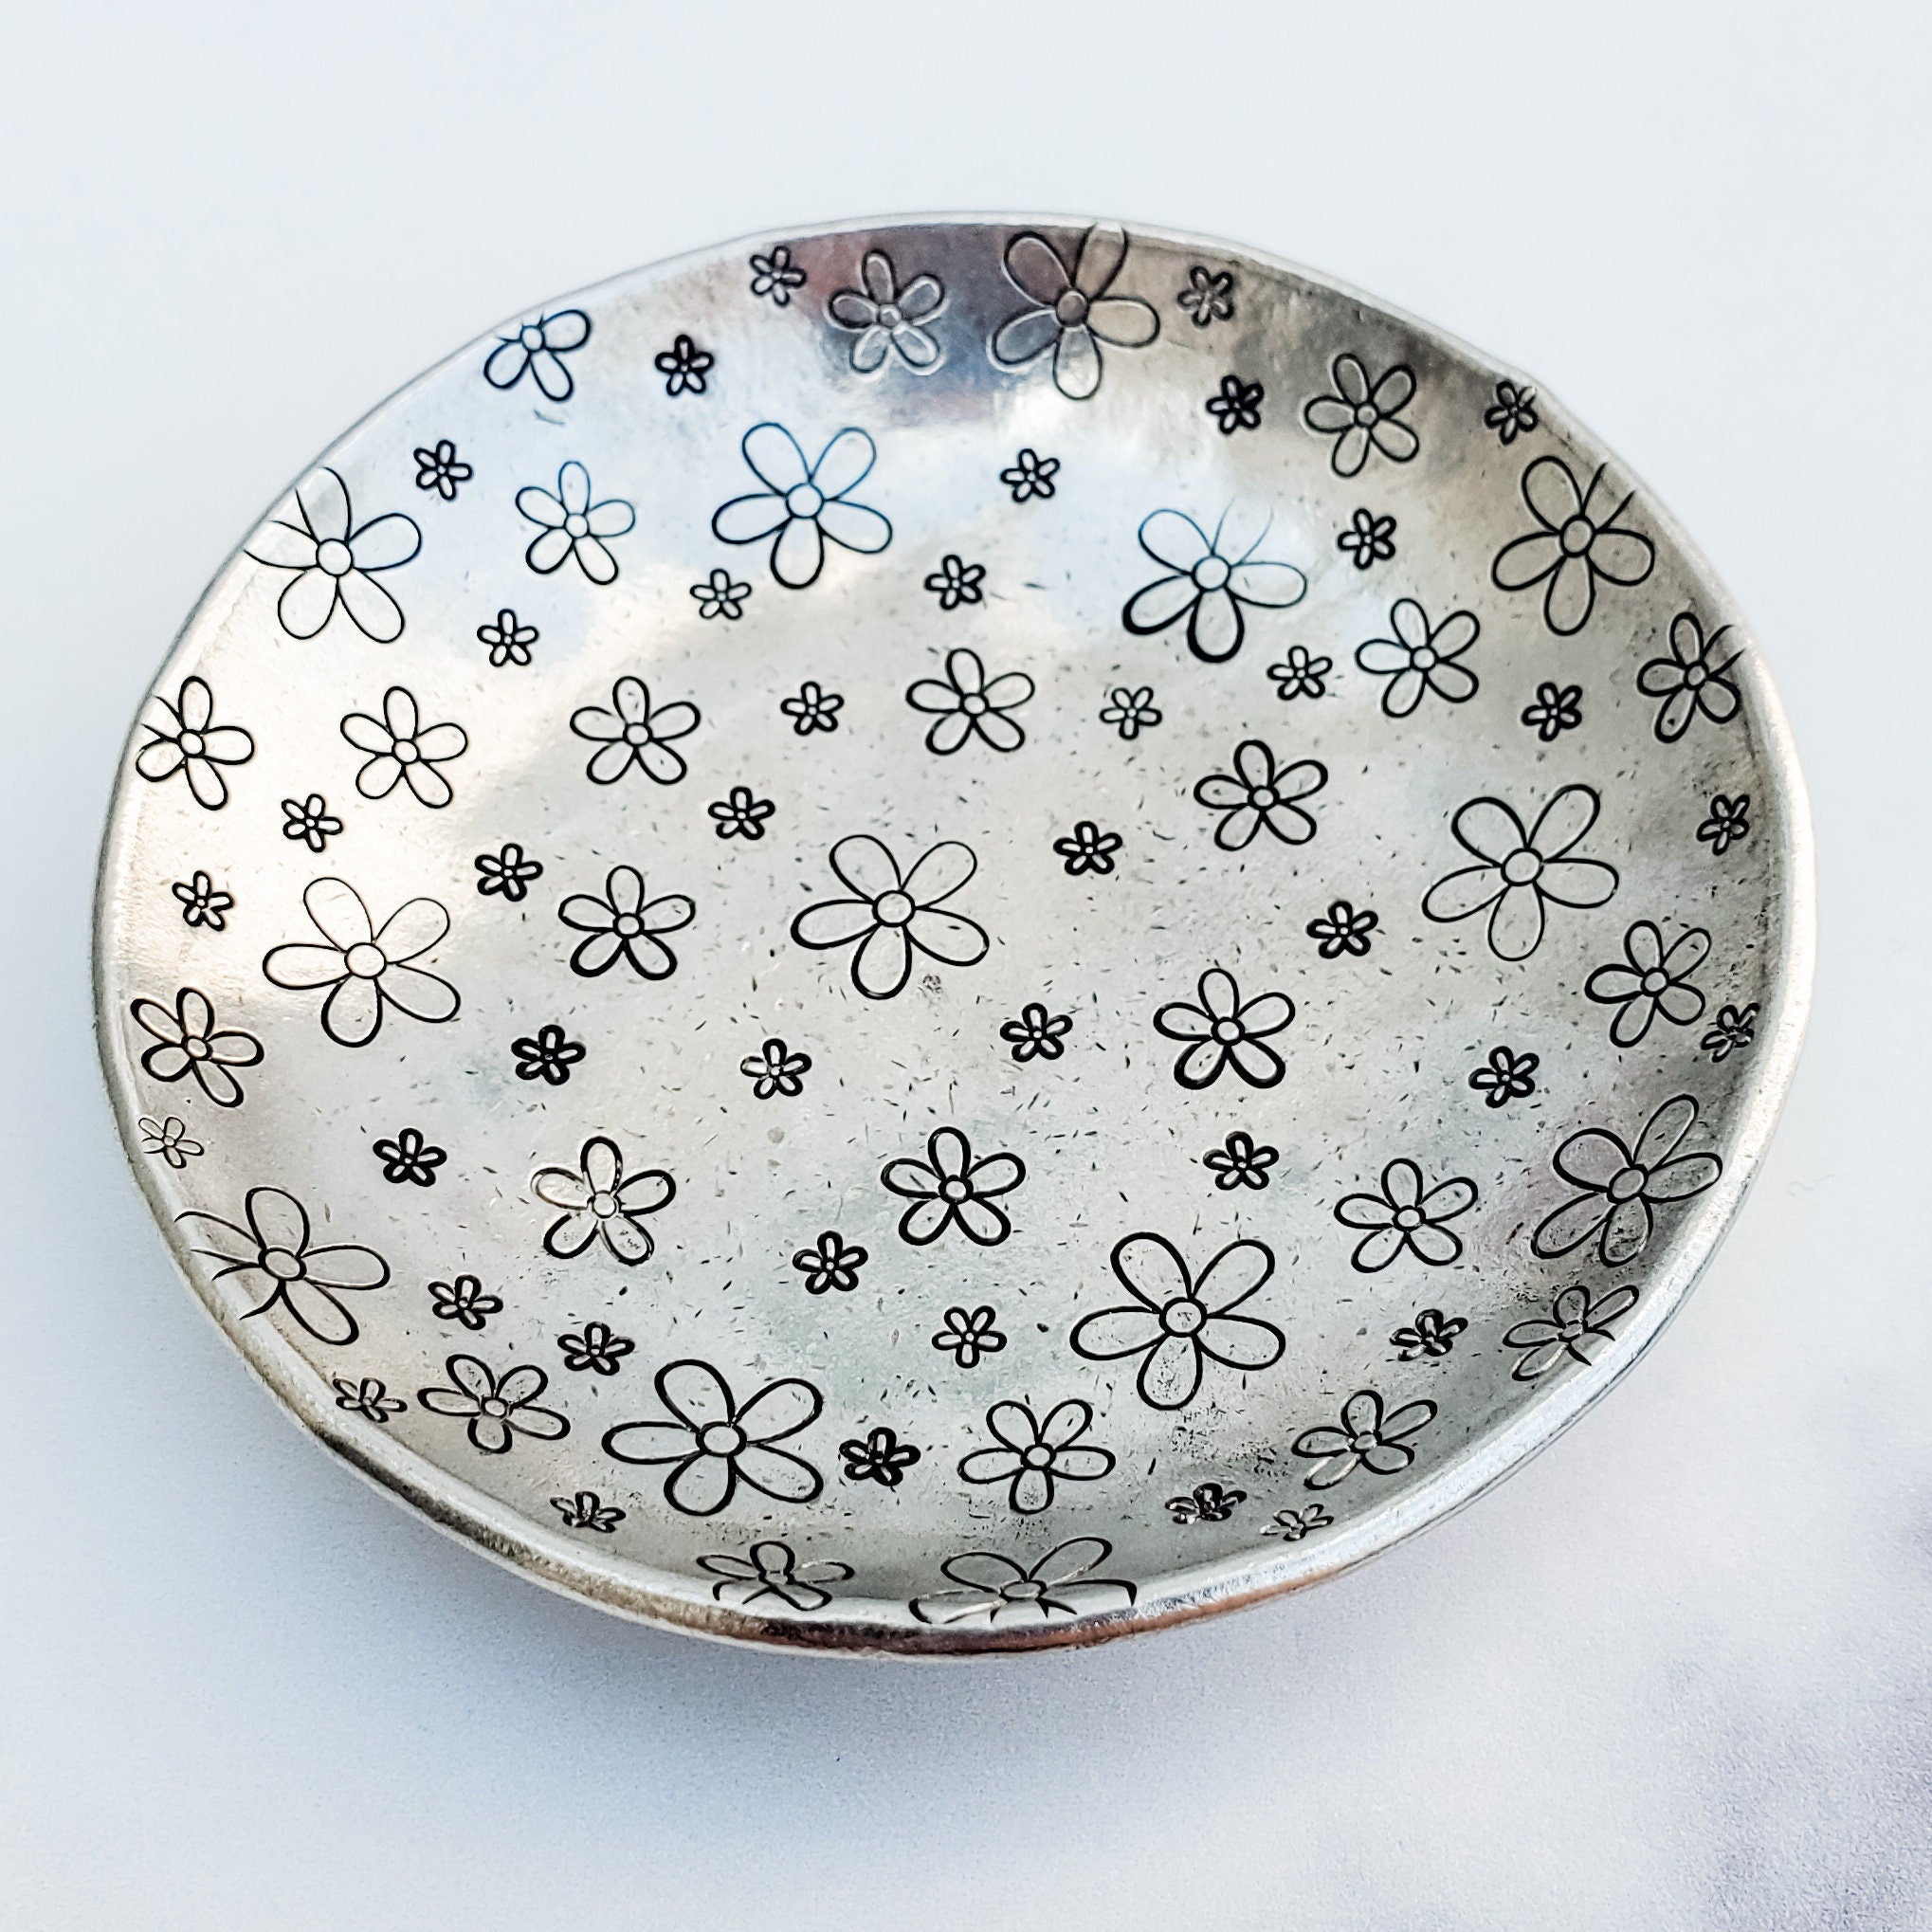 Daisy Ring Dish - Pewter Flower Trinket Dish - Ring Dish for Daisy Lover - Personalized Flower Ring Dish for Mom - Birthday Gift for Her